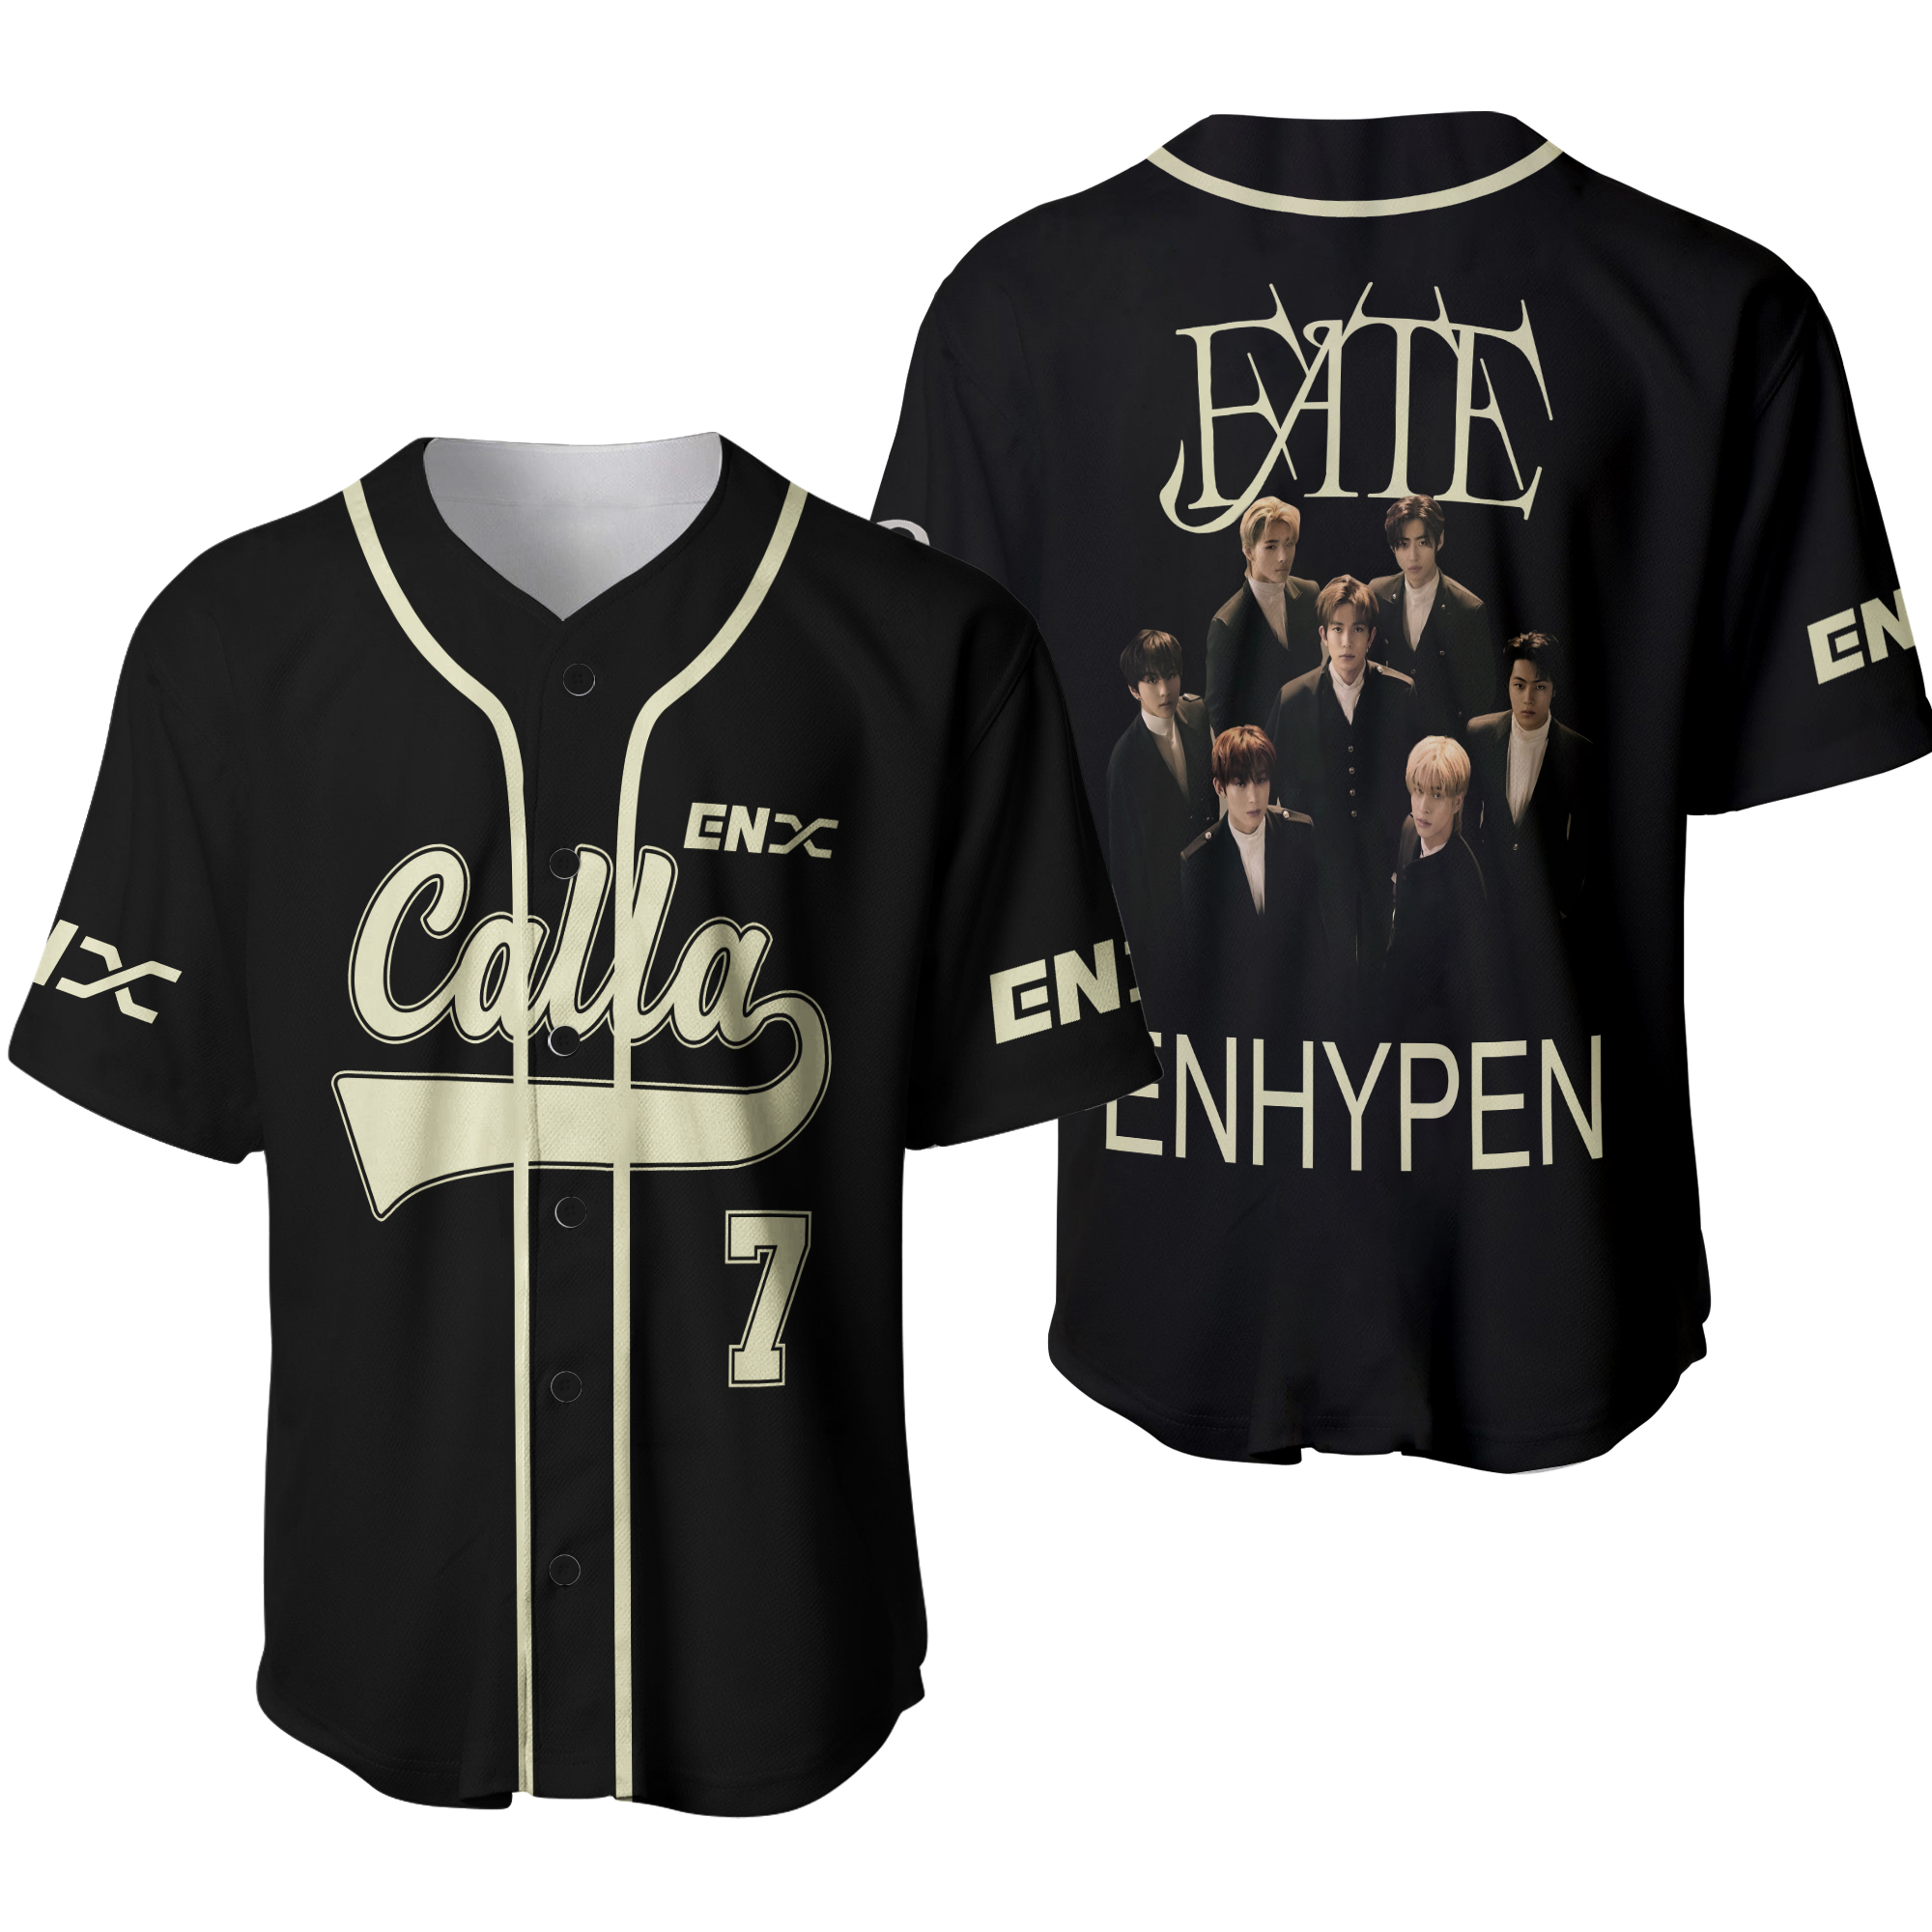 Custom Enhypen Kpop Baseball Jersey Personalized Number and 